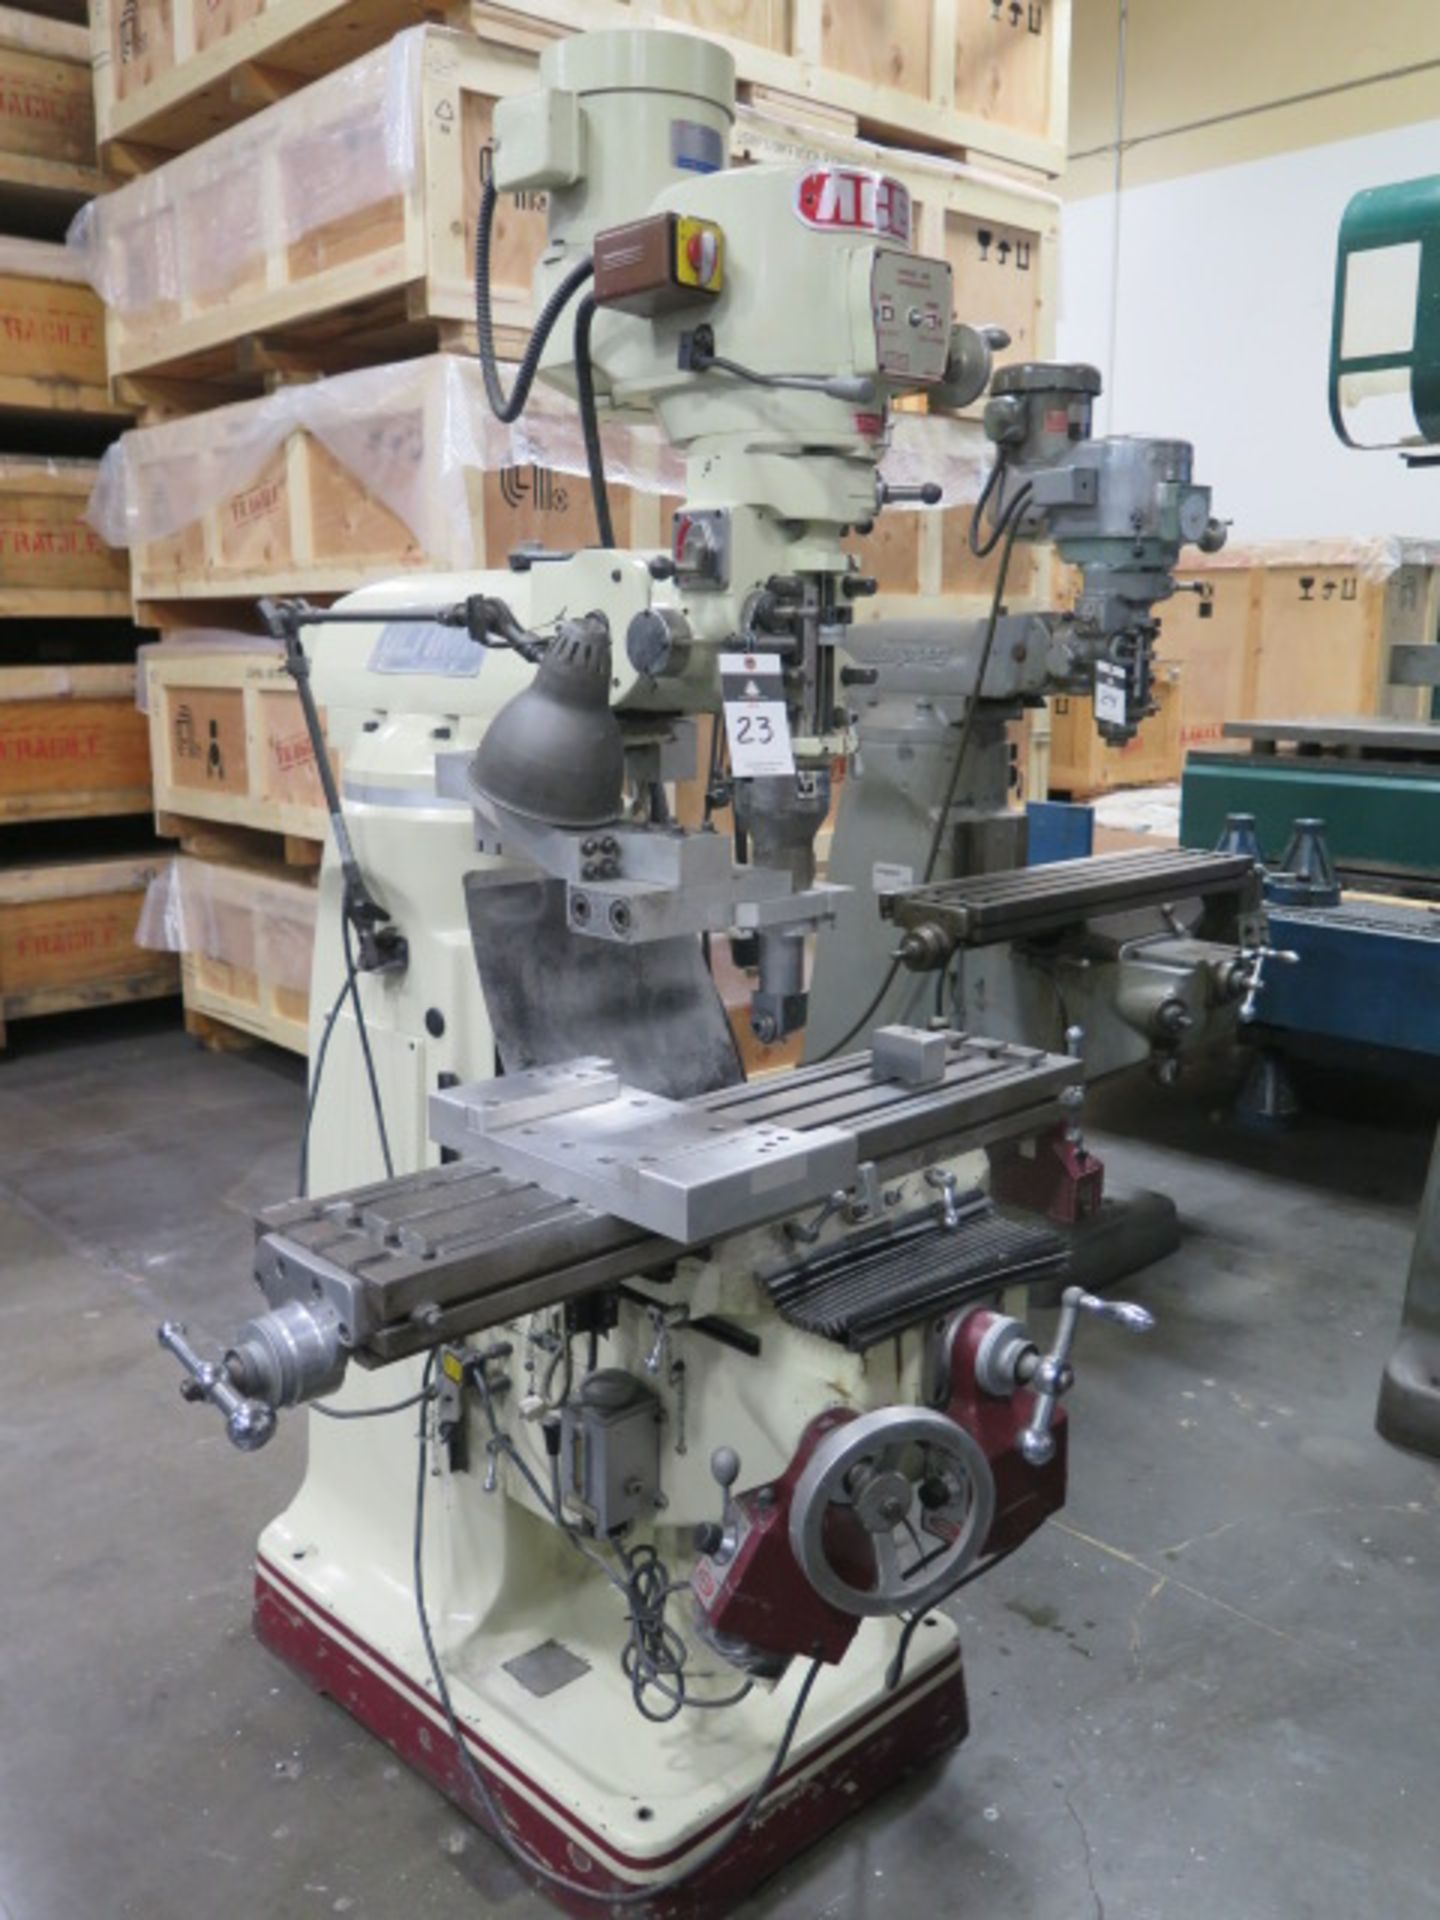 Acer Ultima Vertical Mill w/ 3Hp Motor, 60-4200 Dial Change RPM, Chrome Ways, Power “Y” and Knee Fe - Image 2 of 12